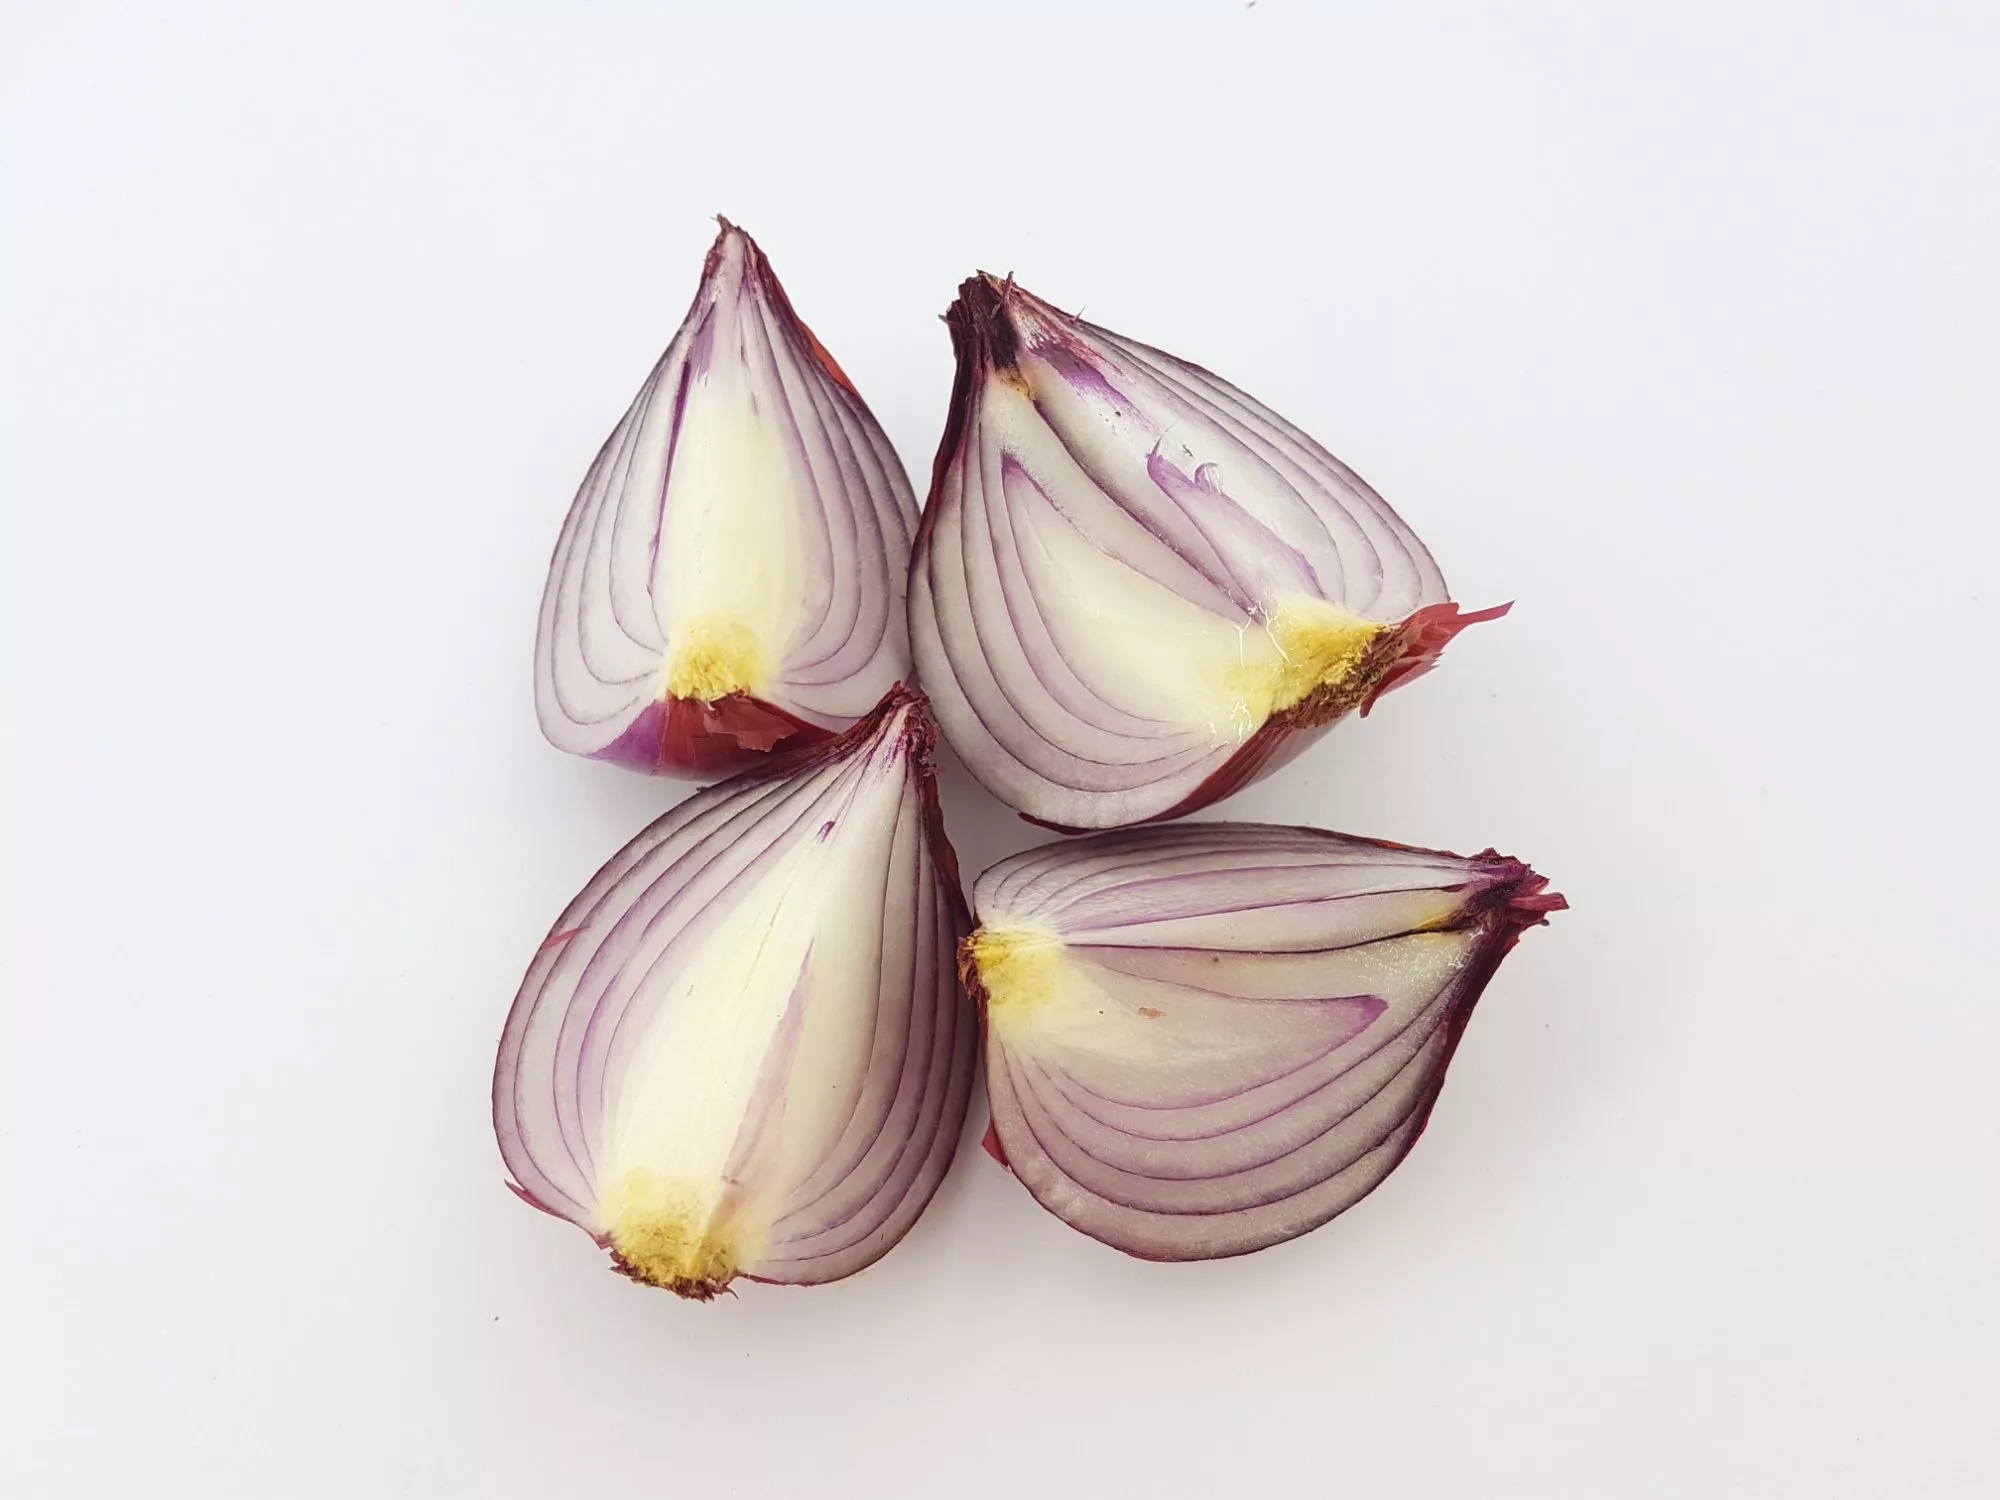 Picture of four onions